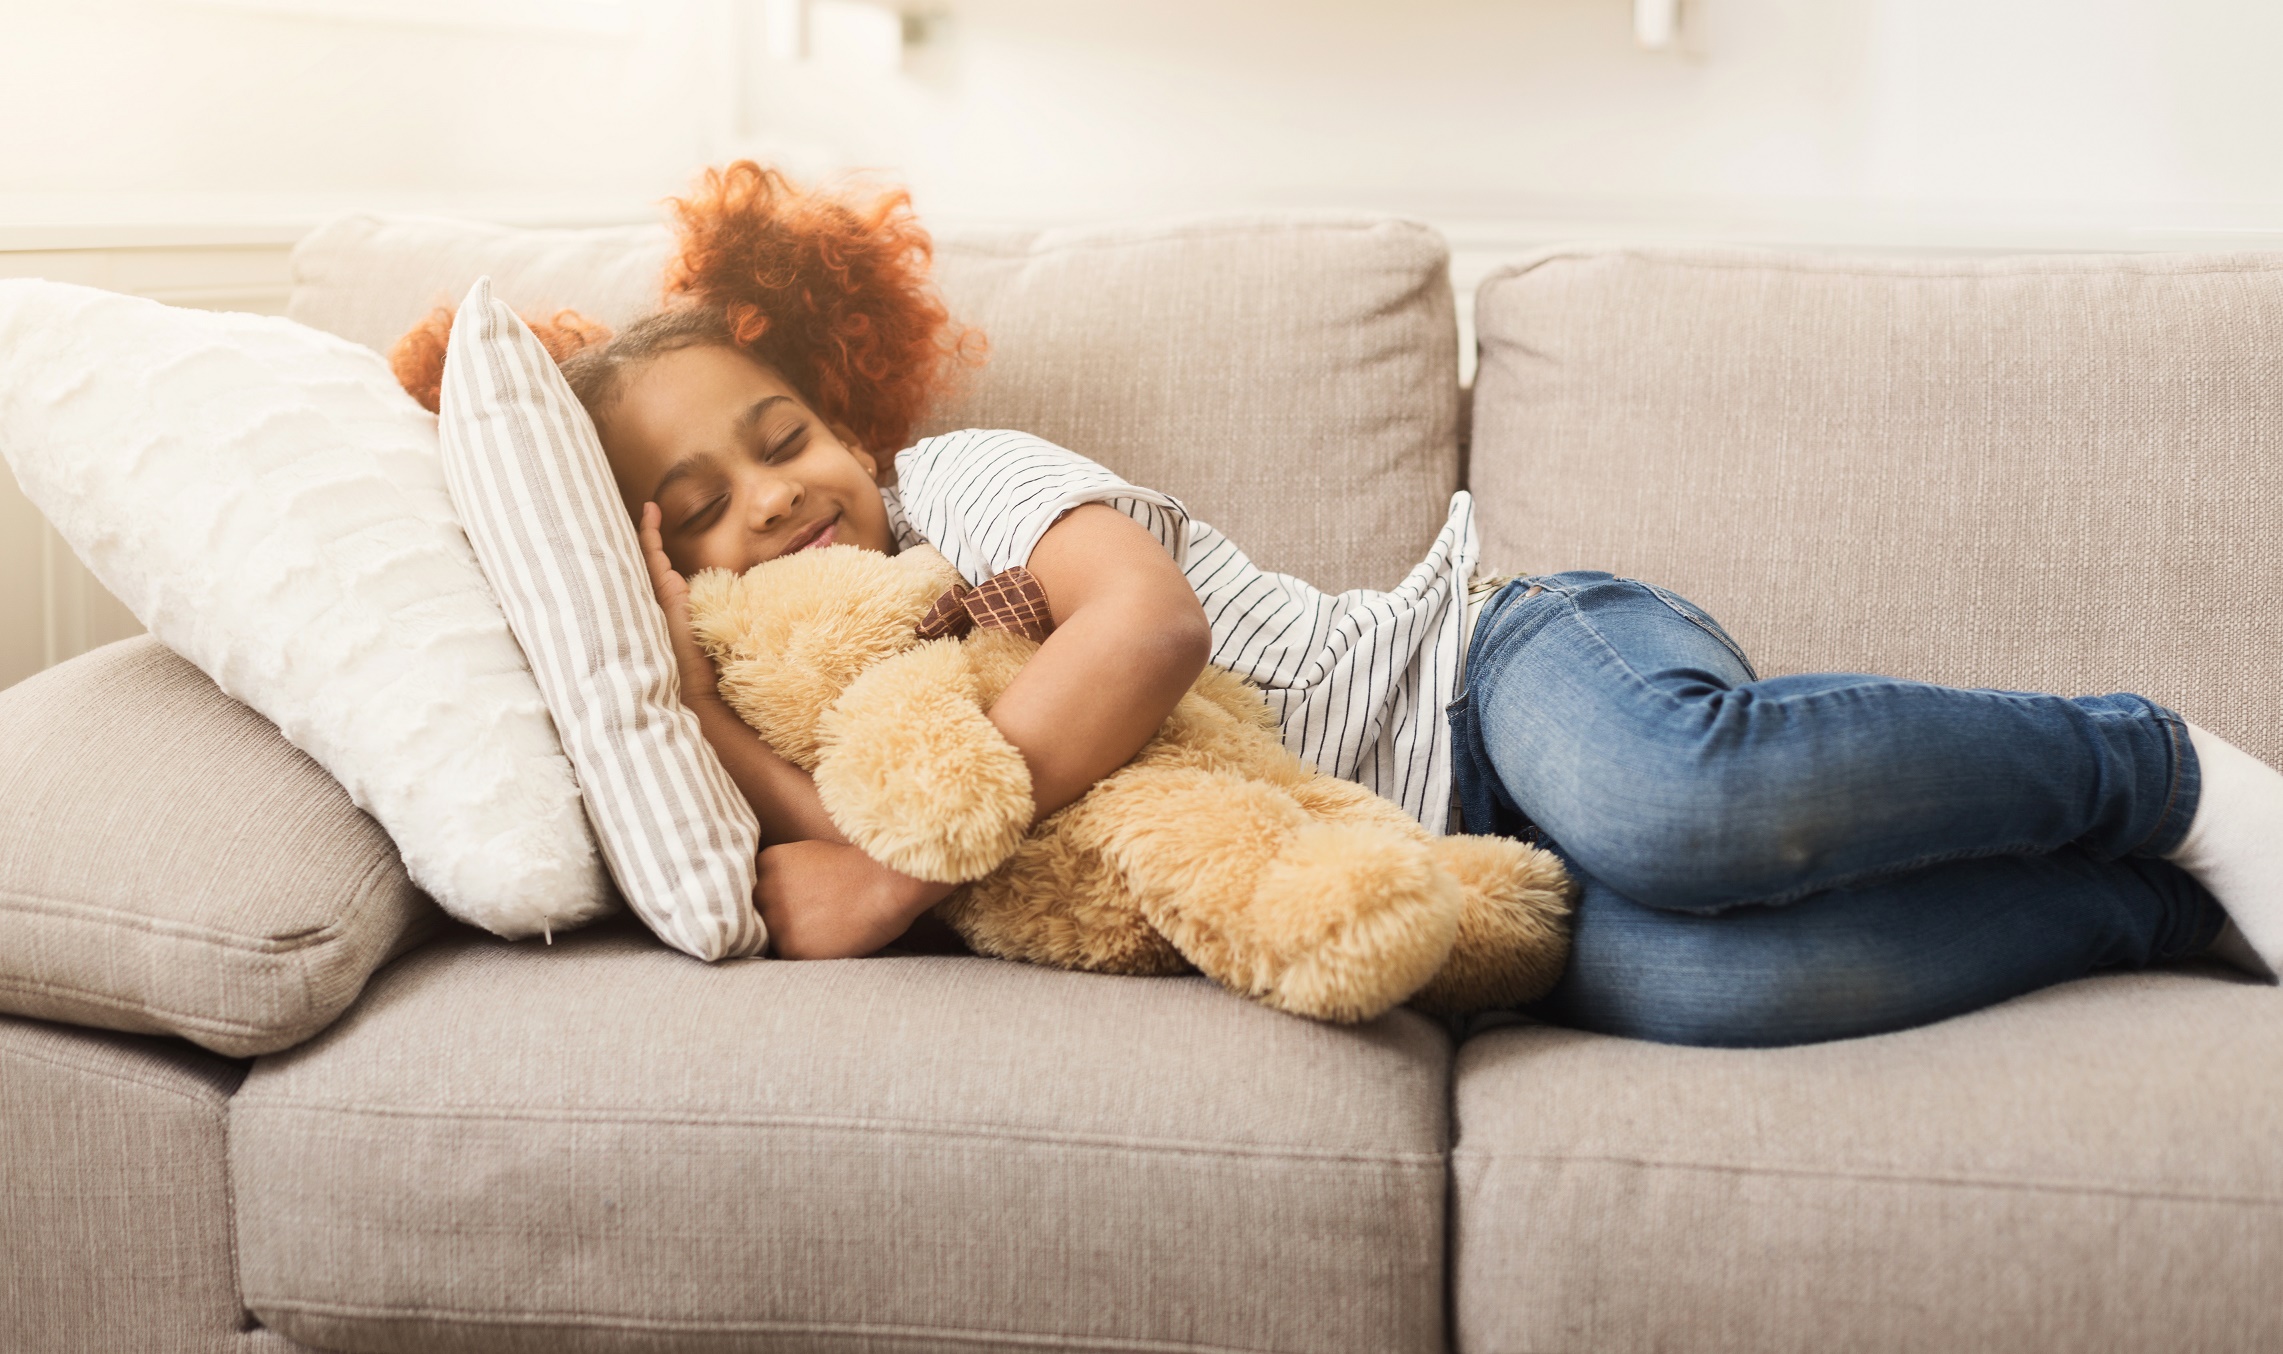 Insufficient sleep time in children can be harmful